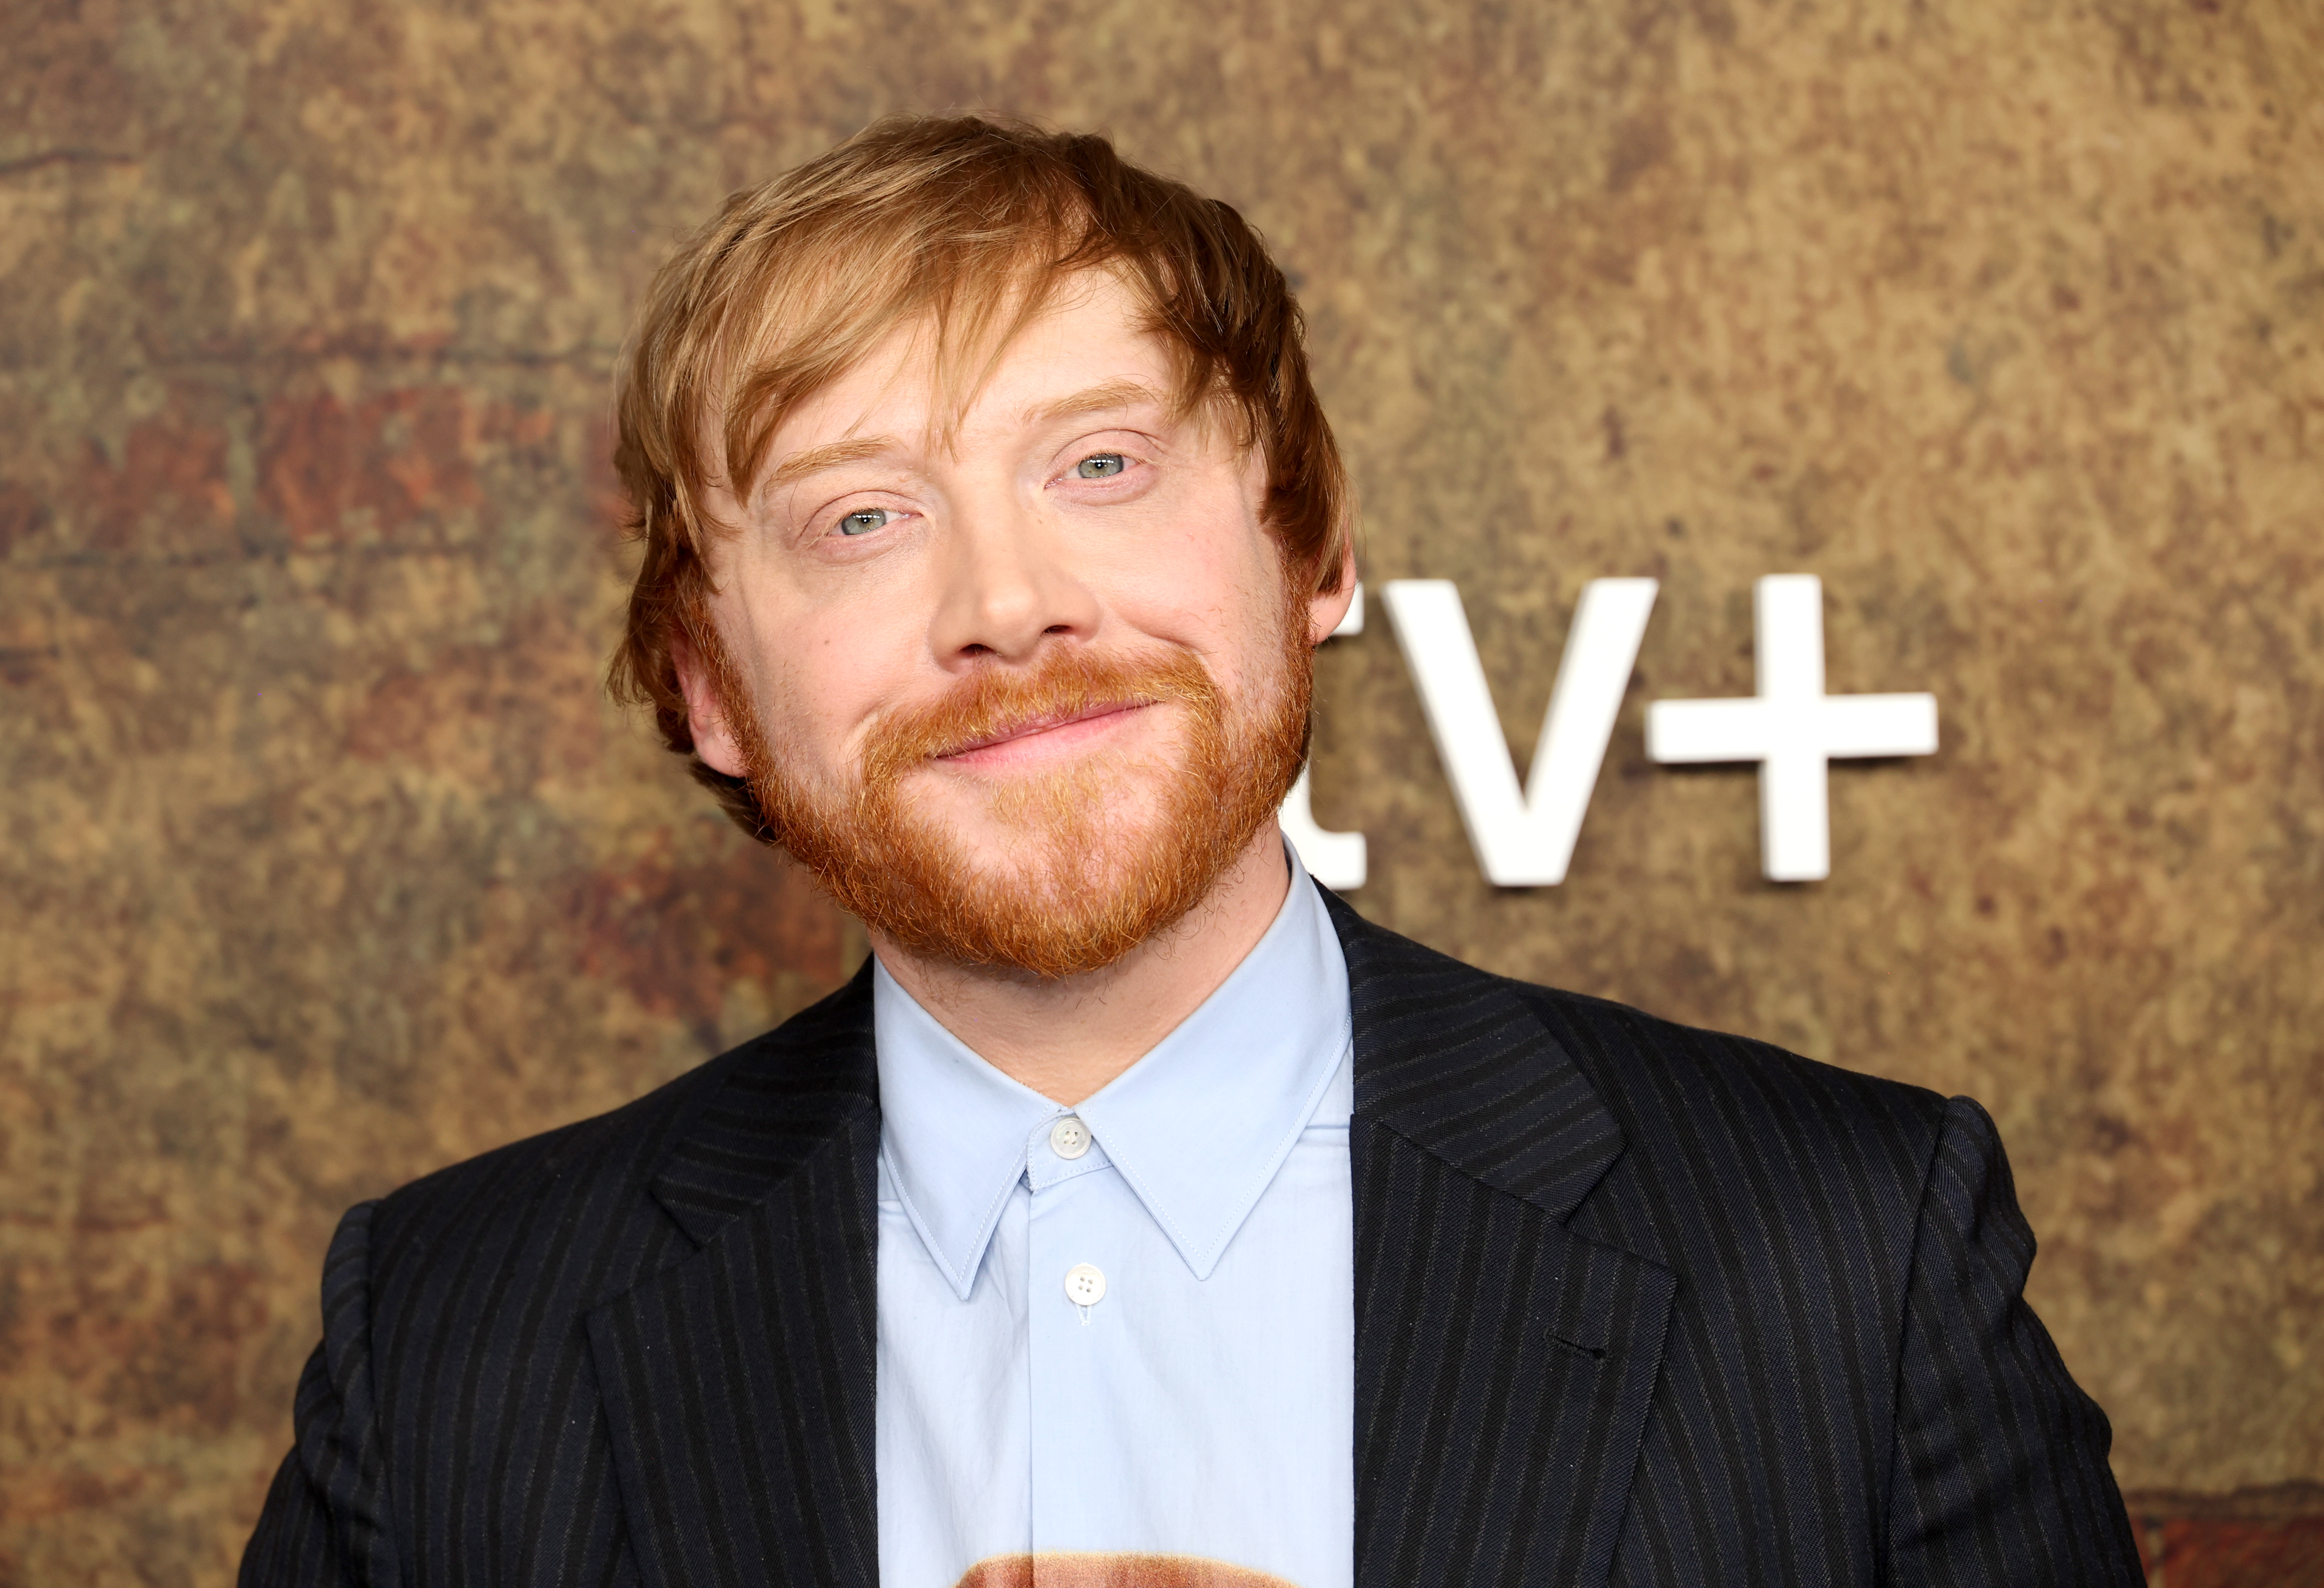 Rupert Grint at the season 4 premiere of "Servant" in New York City on January 9, 2023 | Source: Getty Images